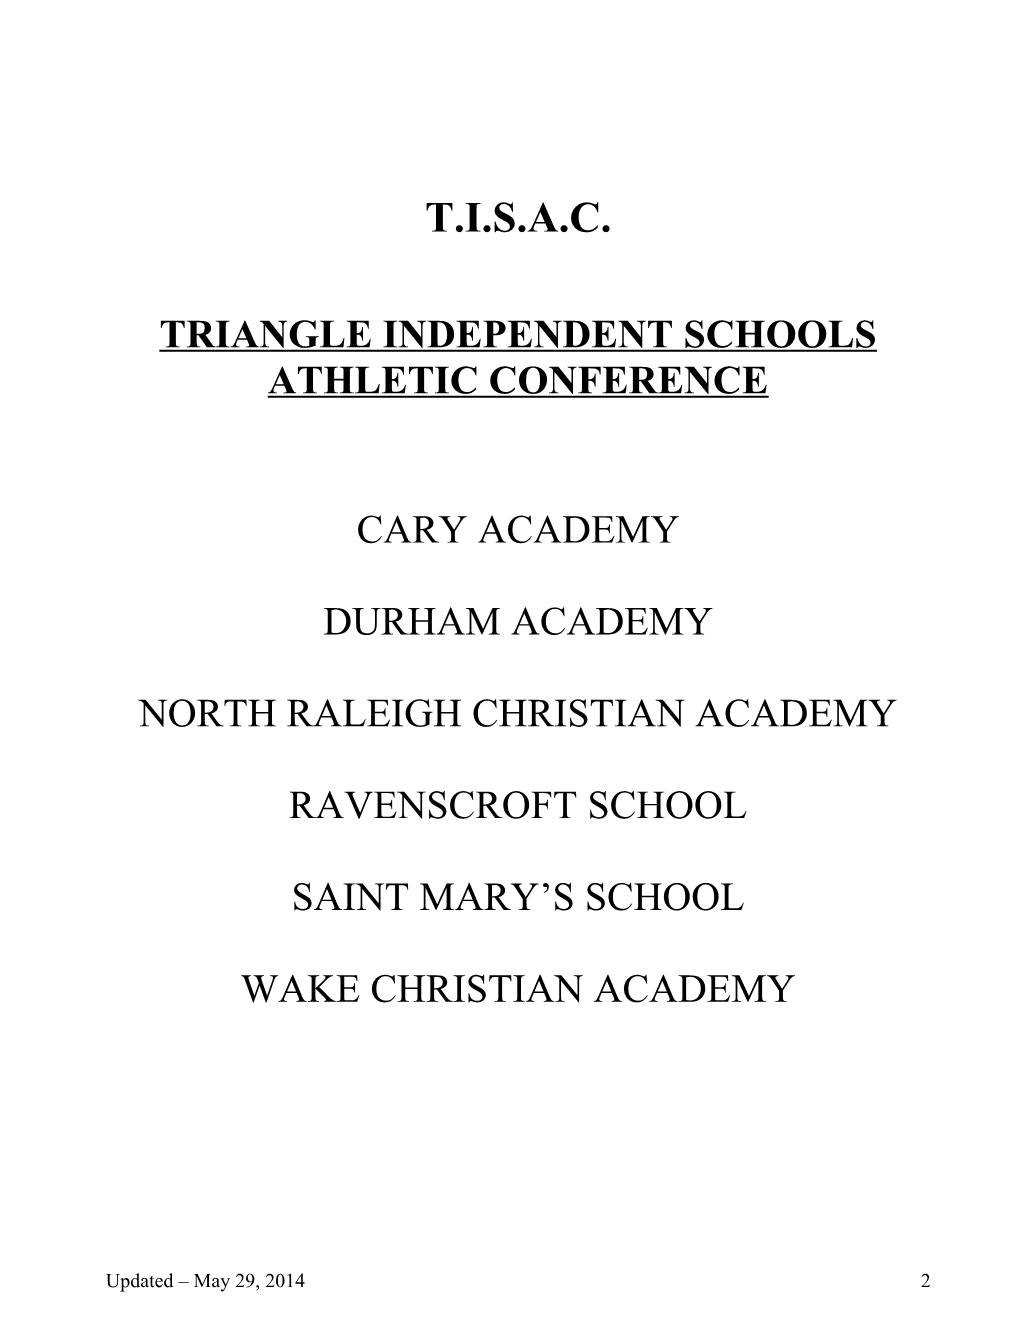 Triangle Independent Schools Athletic Conference